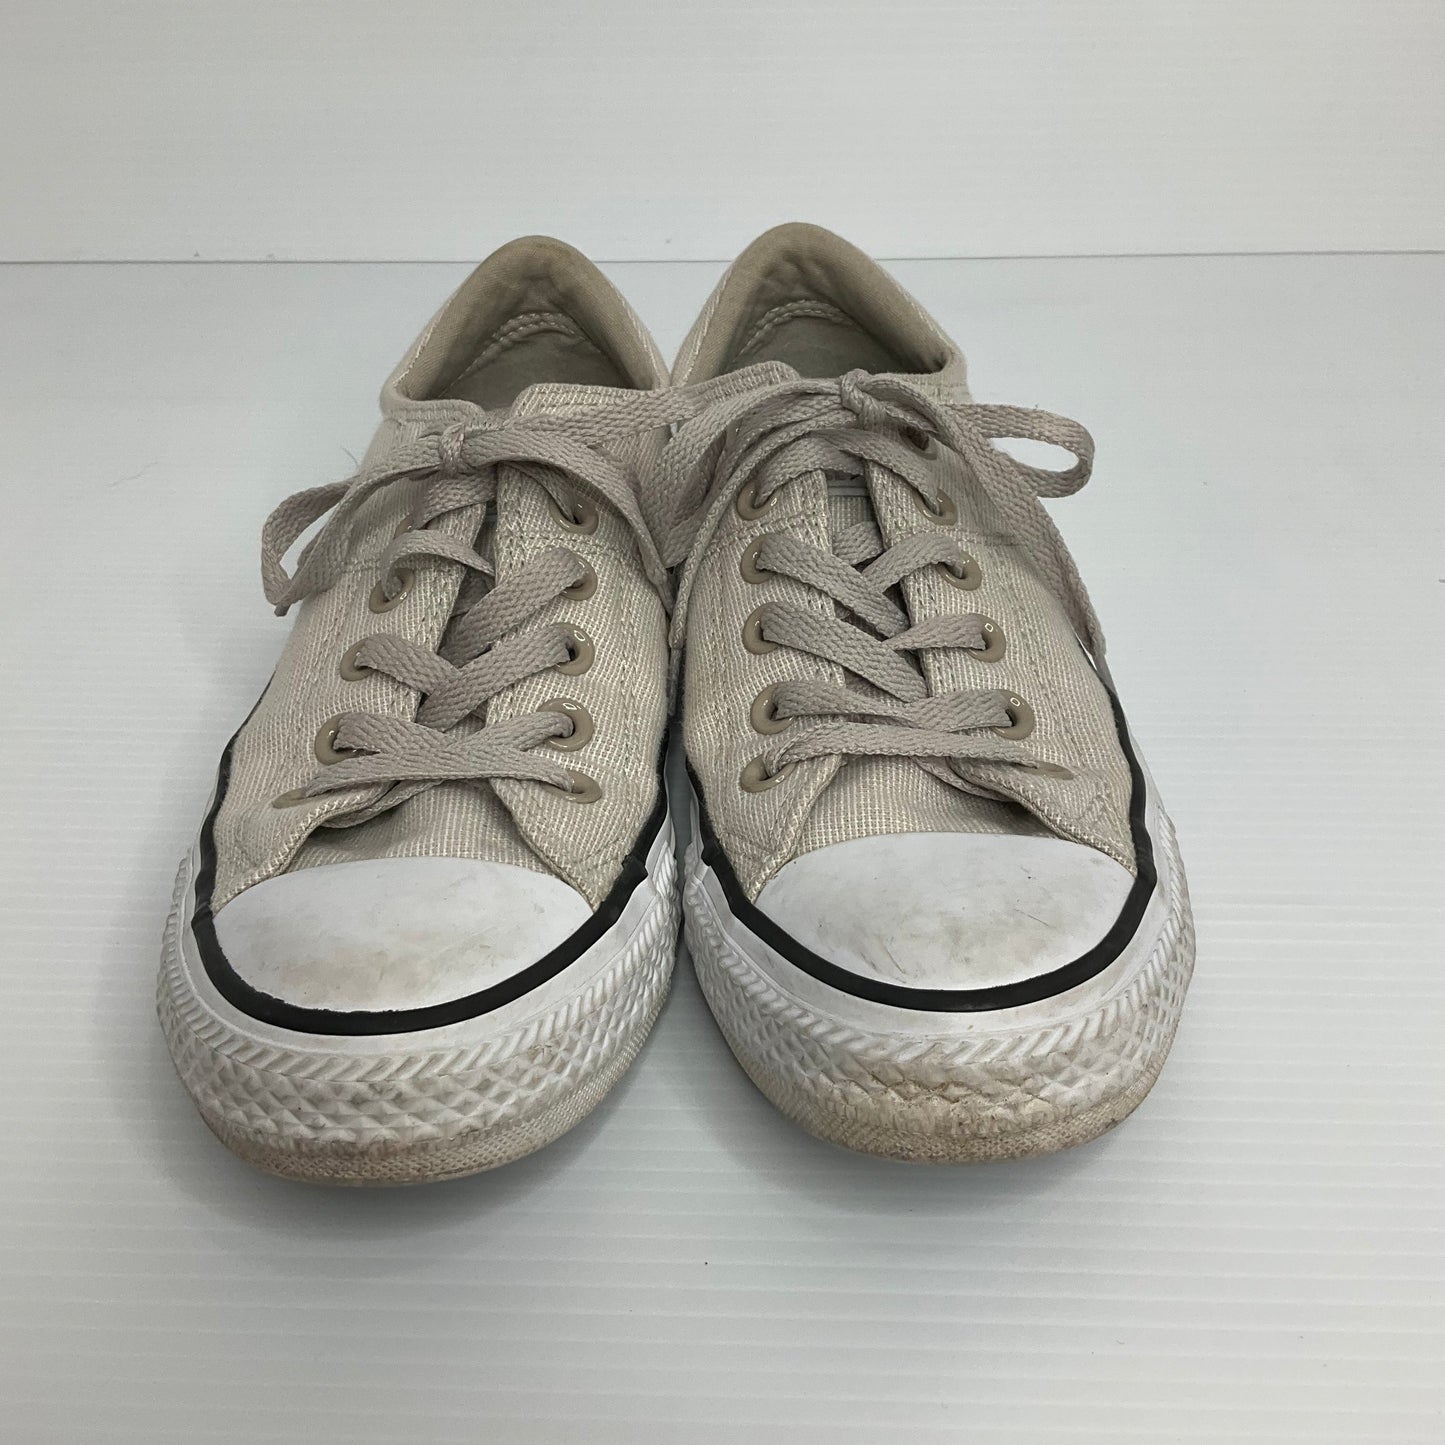 Tan Shoes Sneakers Converse, Size 7.5